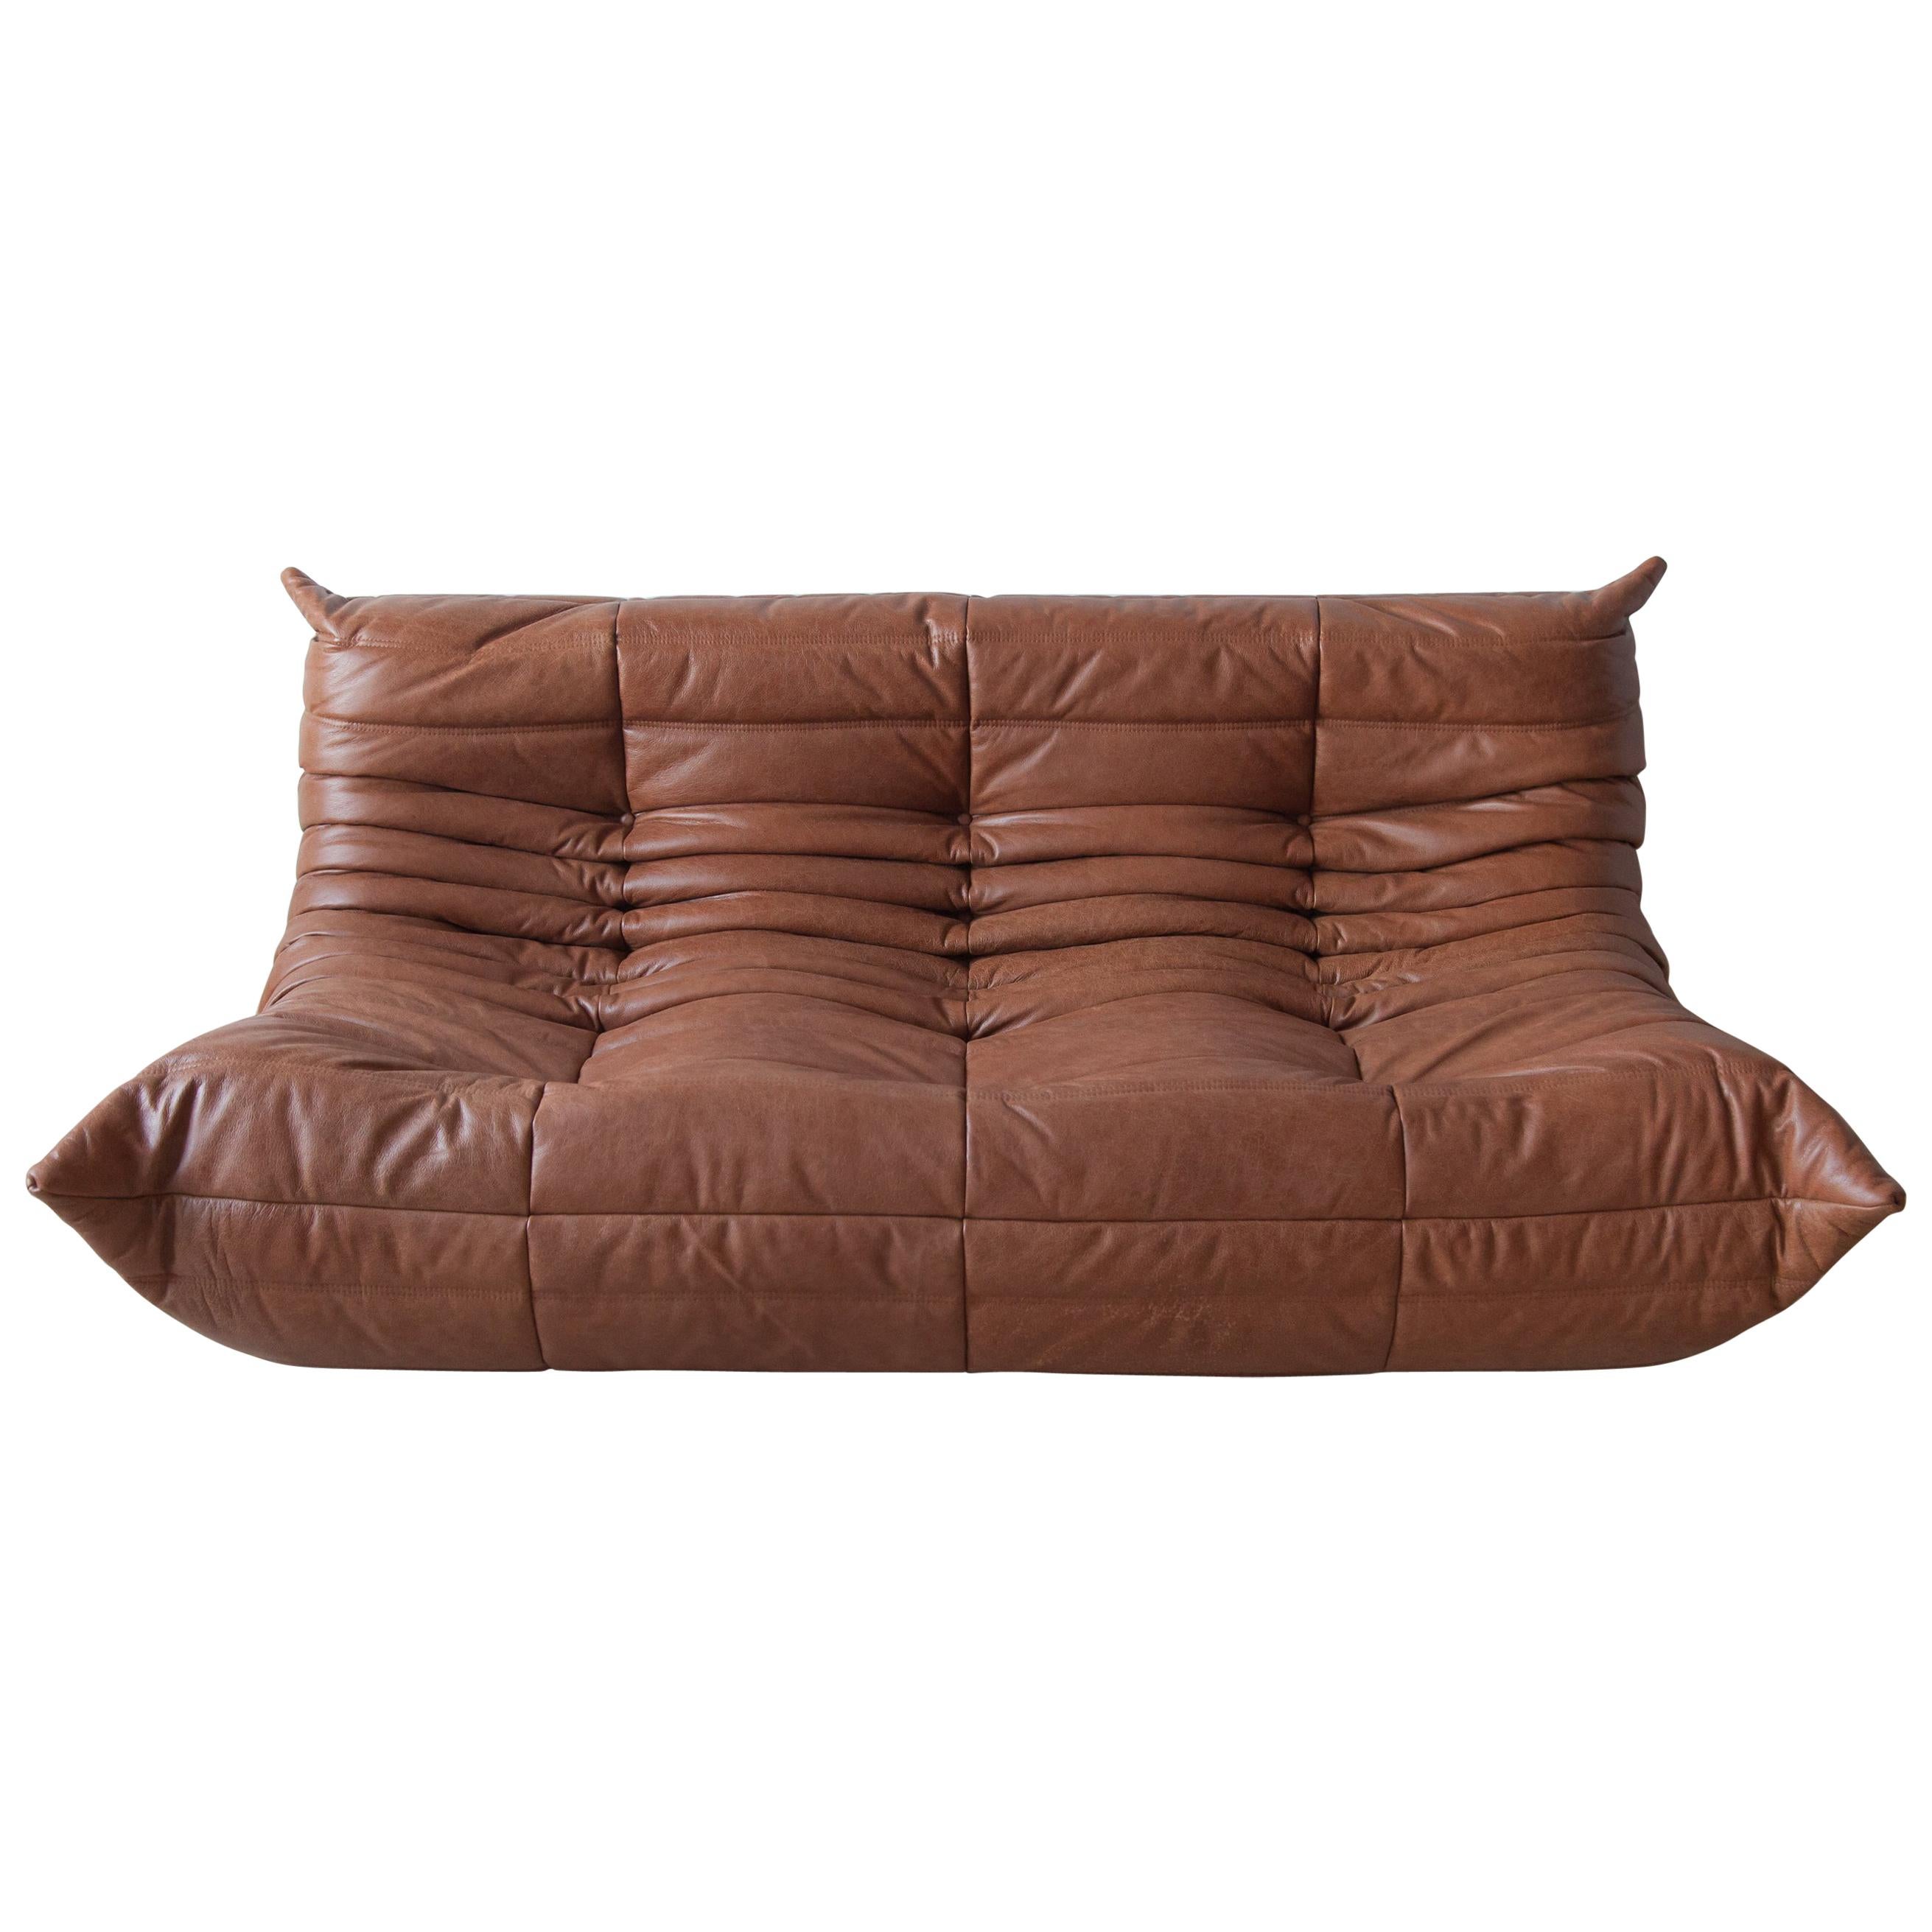 Togo 3-Seat Sofa in Kentucky Brown Leather by Michel Ducaroy for Ligne Roset For Sale